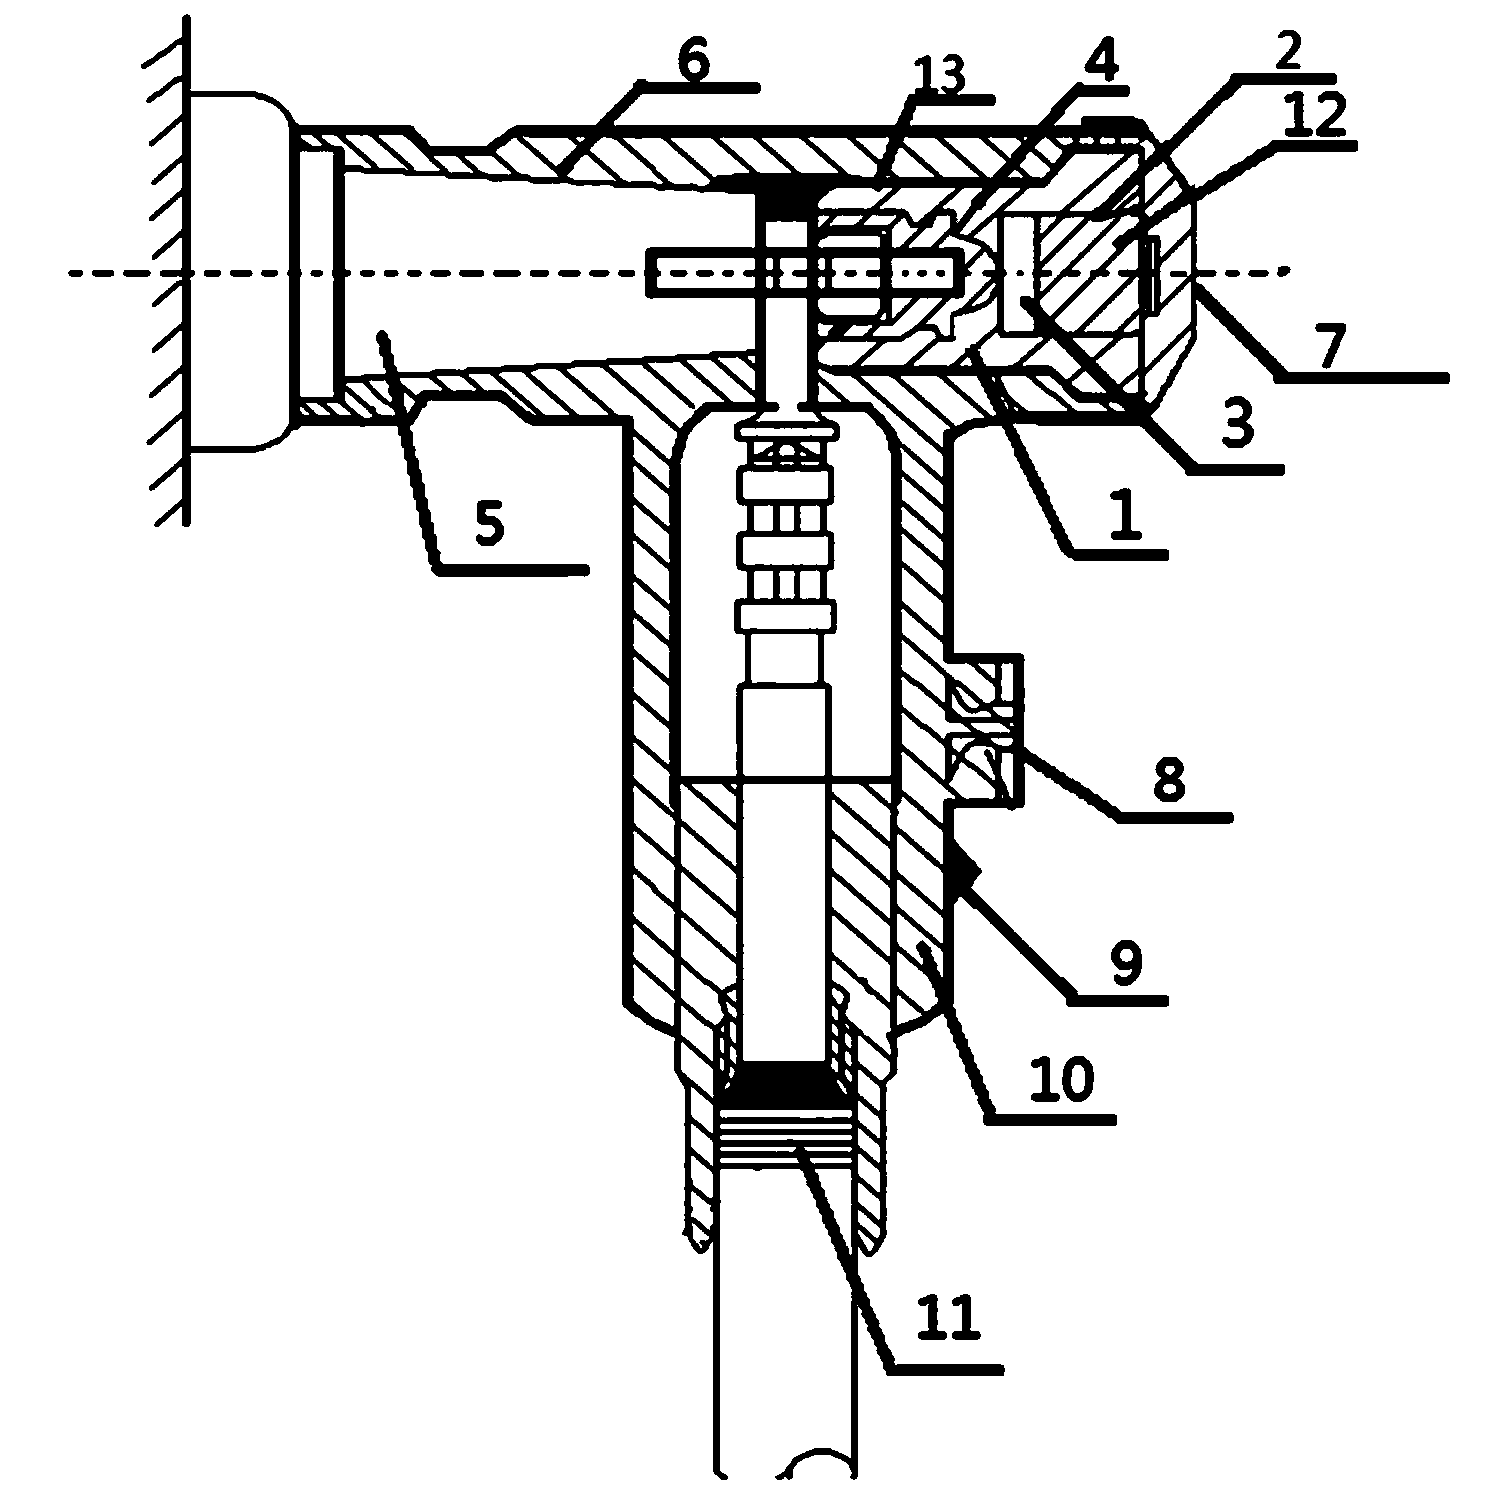 On-line temperature measuring device for monitoring connecting portion between ring main unit and 10 kV cable head